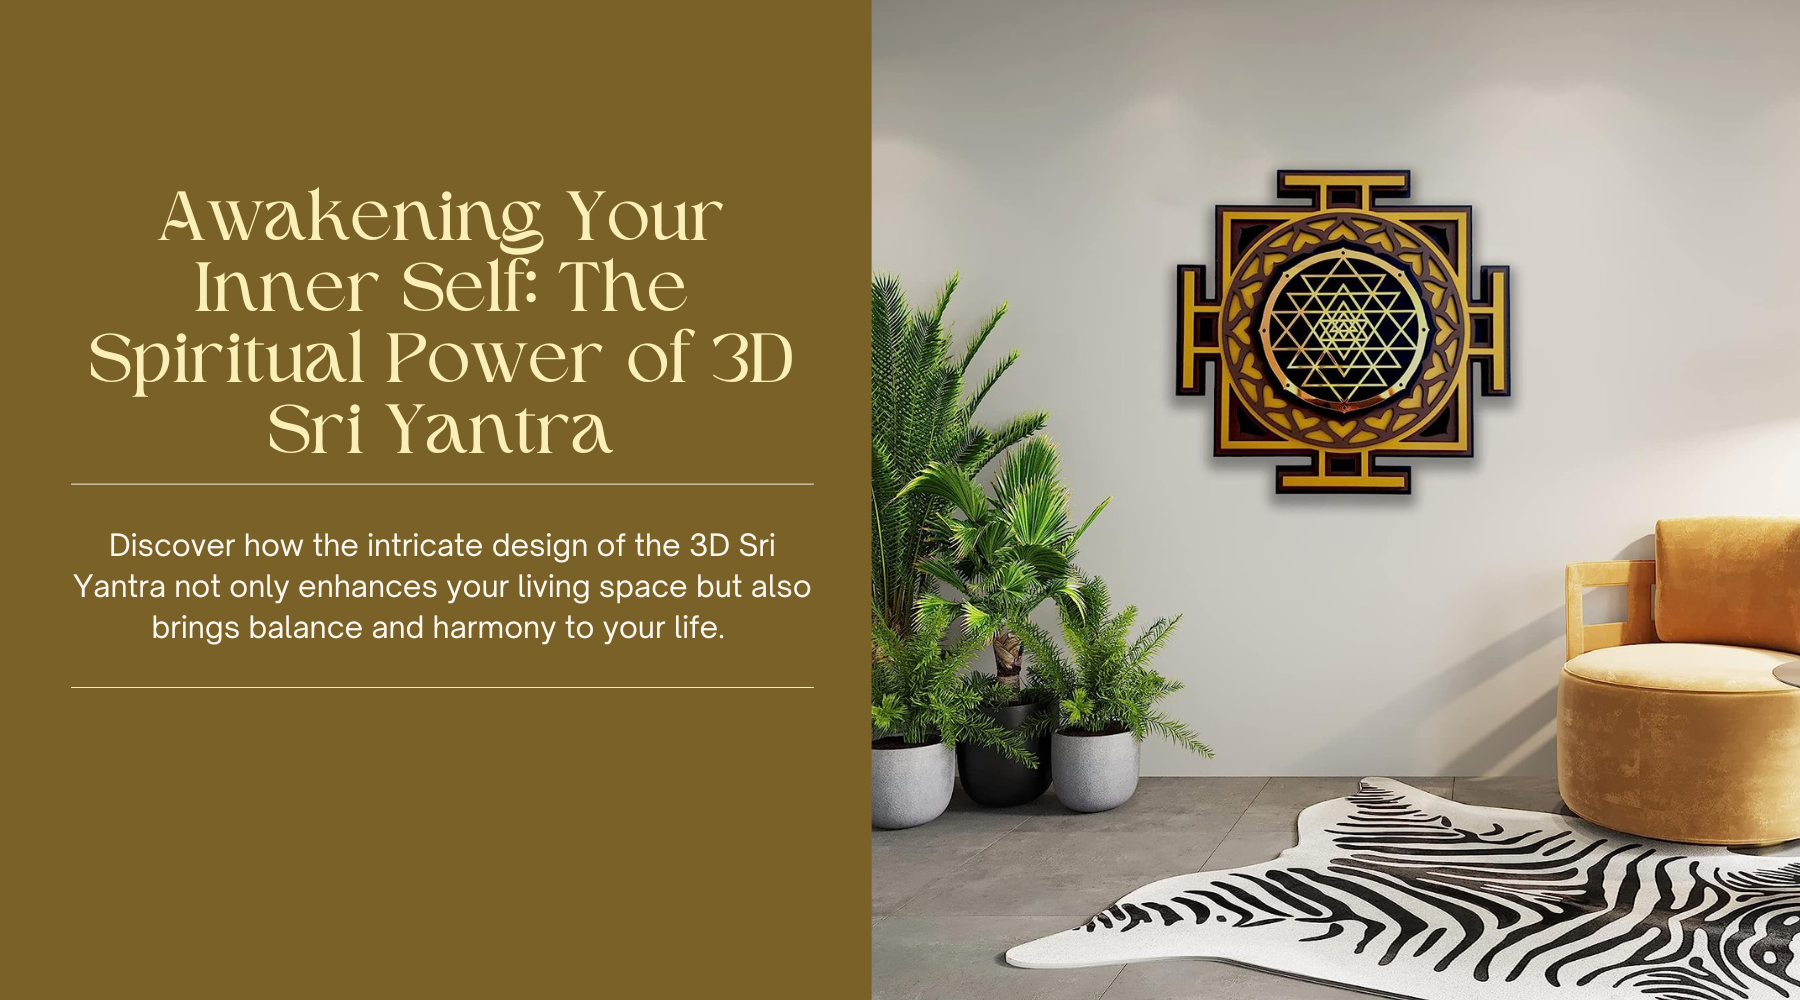 Incorporating the 3D Sri Yantra in Your Home: Tips and Benefits